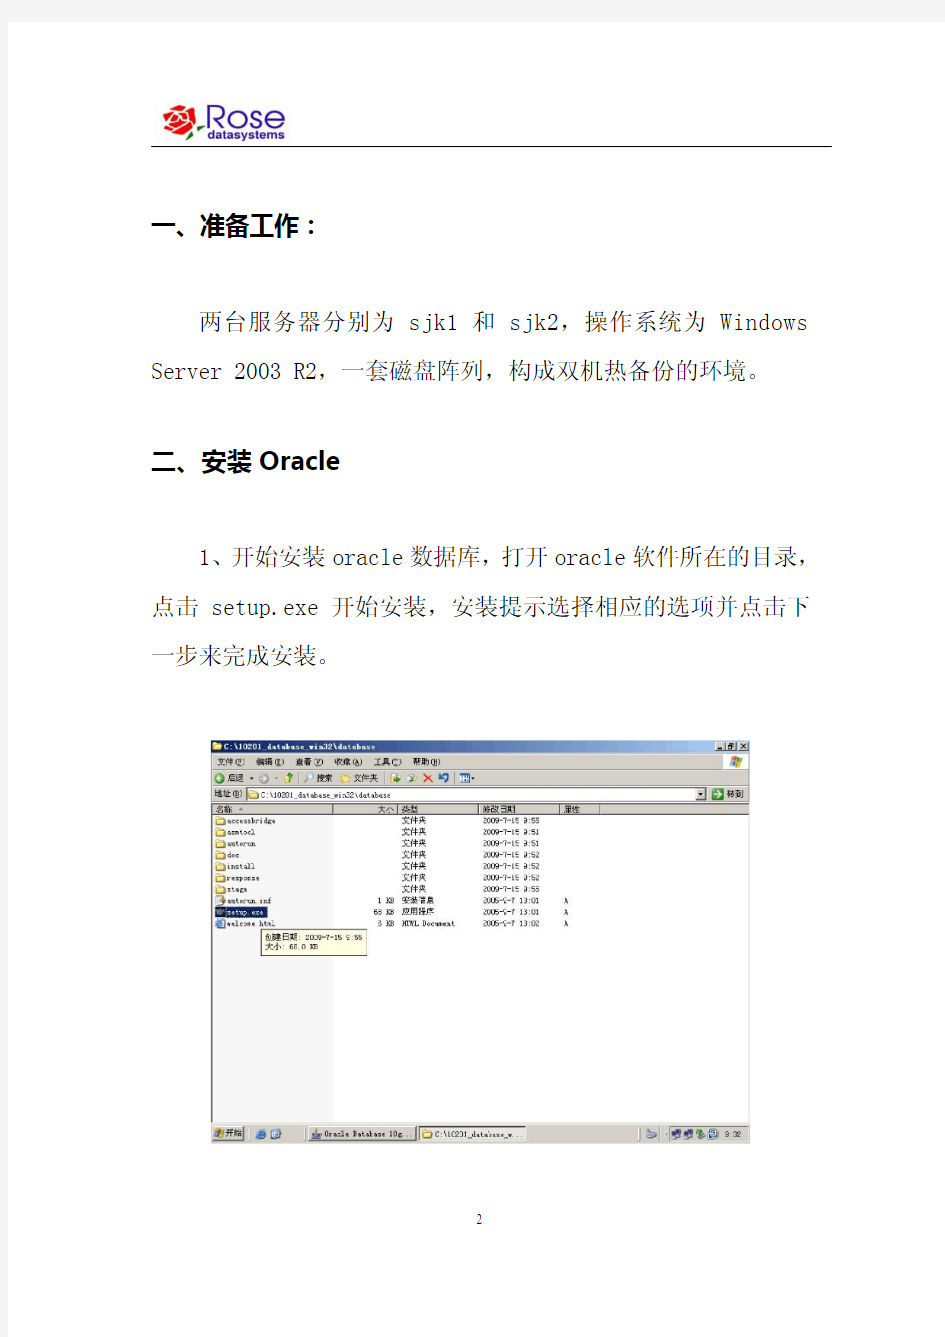 RoseHA 8.5 for Oracle 10g 配置手册